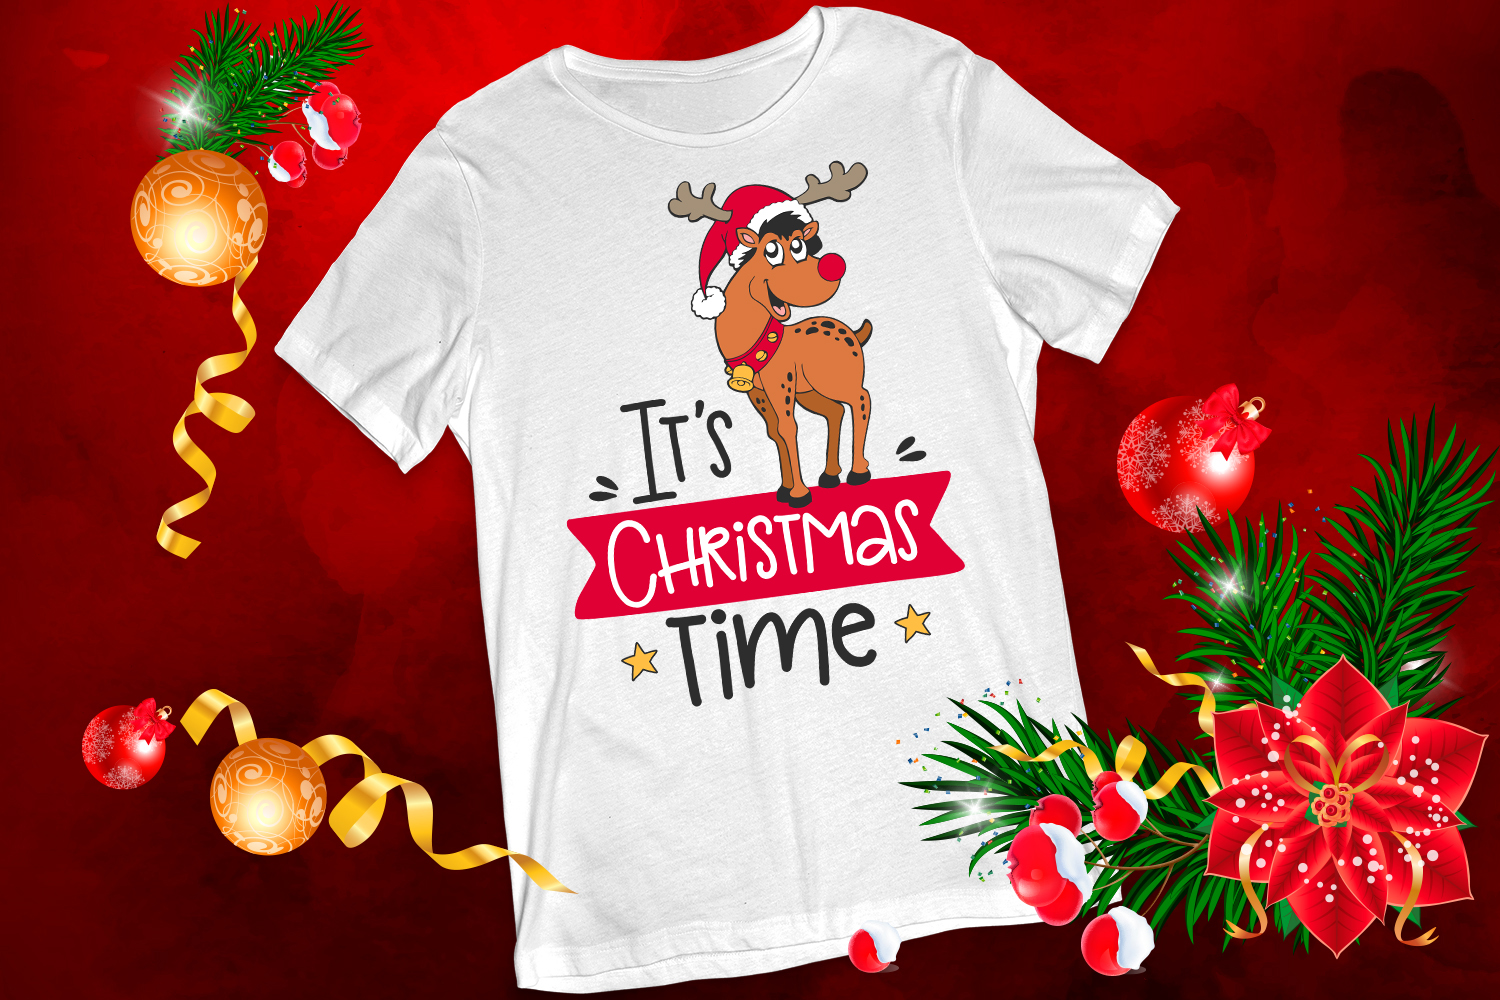 Download It's Christmas Time with Cute Reindeer SVG - Xmas cut ...